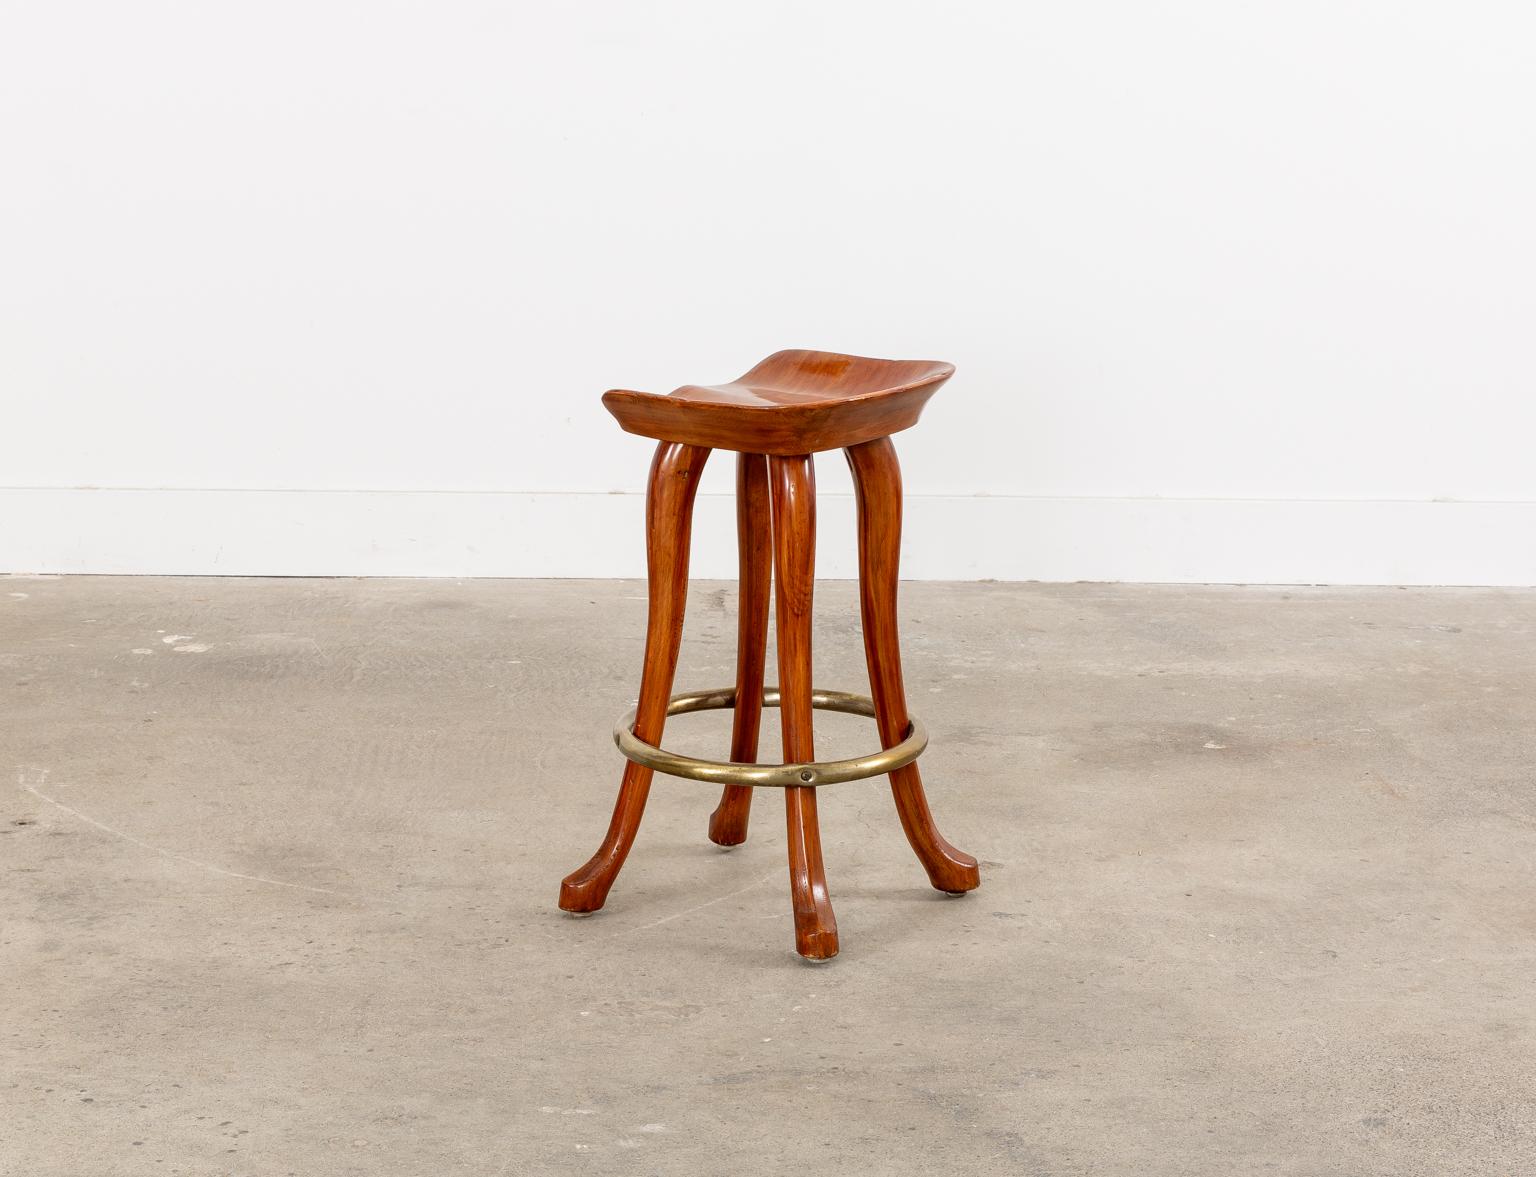 Rare set of six carved counter height bar stools handcrafted by Jean of Topanga California. The stools feature a carved saddle style seat supported by elegant legs ending with a hoof-style foot. The legs are conjoined by a brass toned ring stretcher